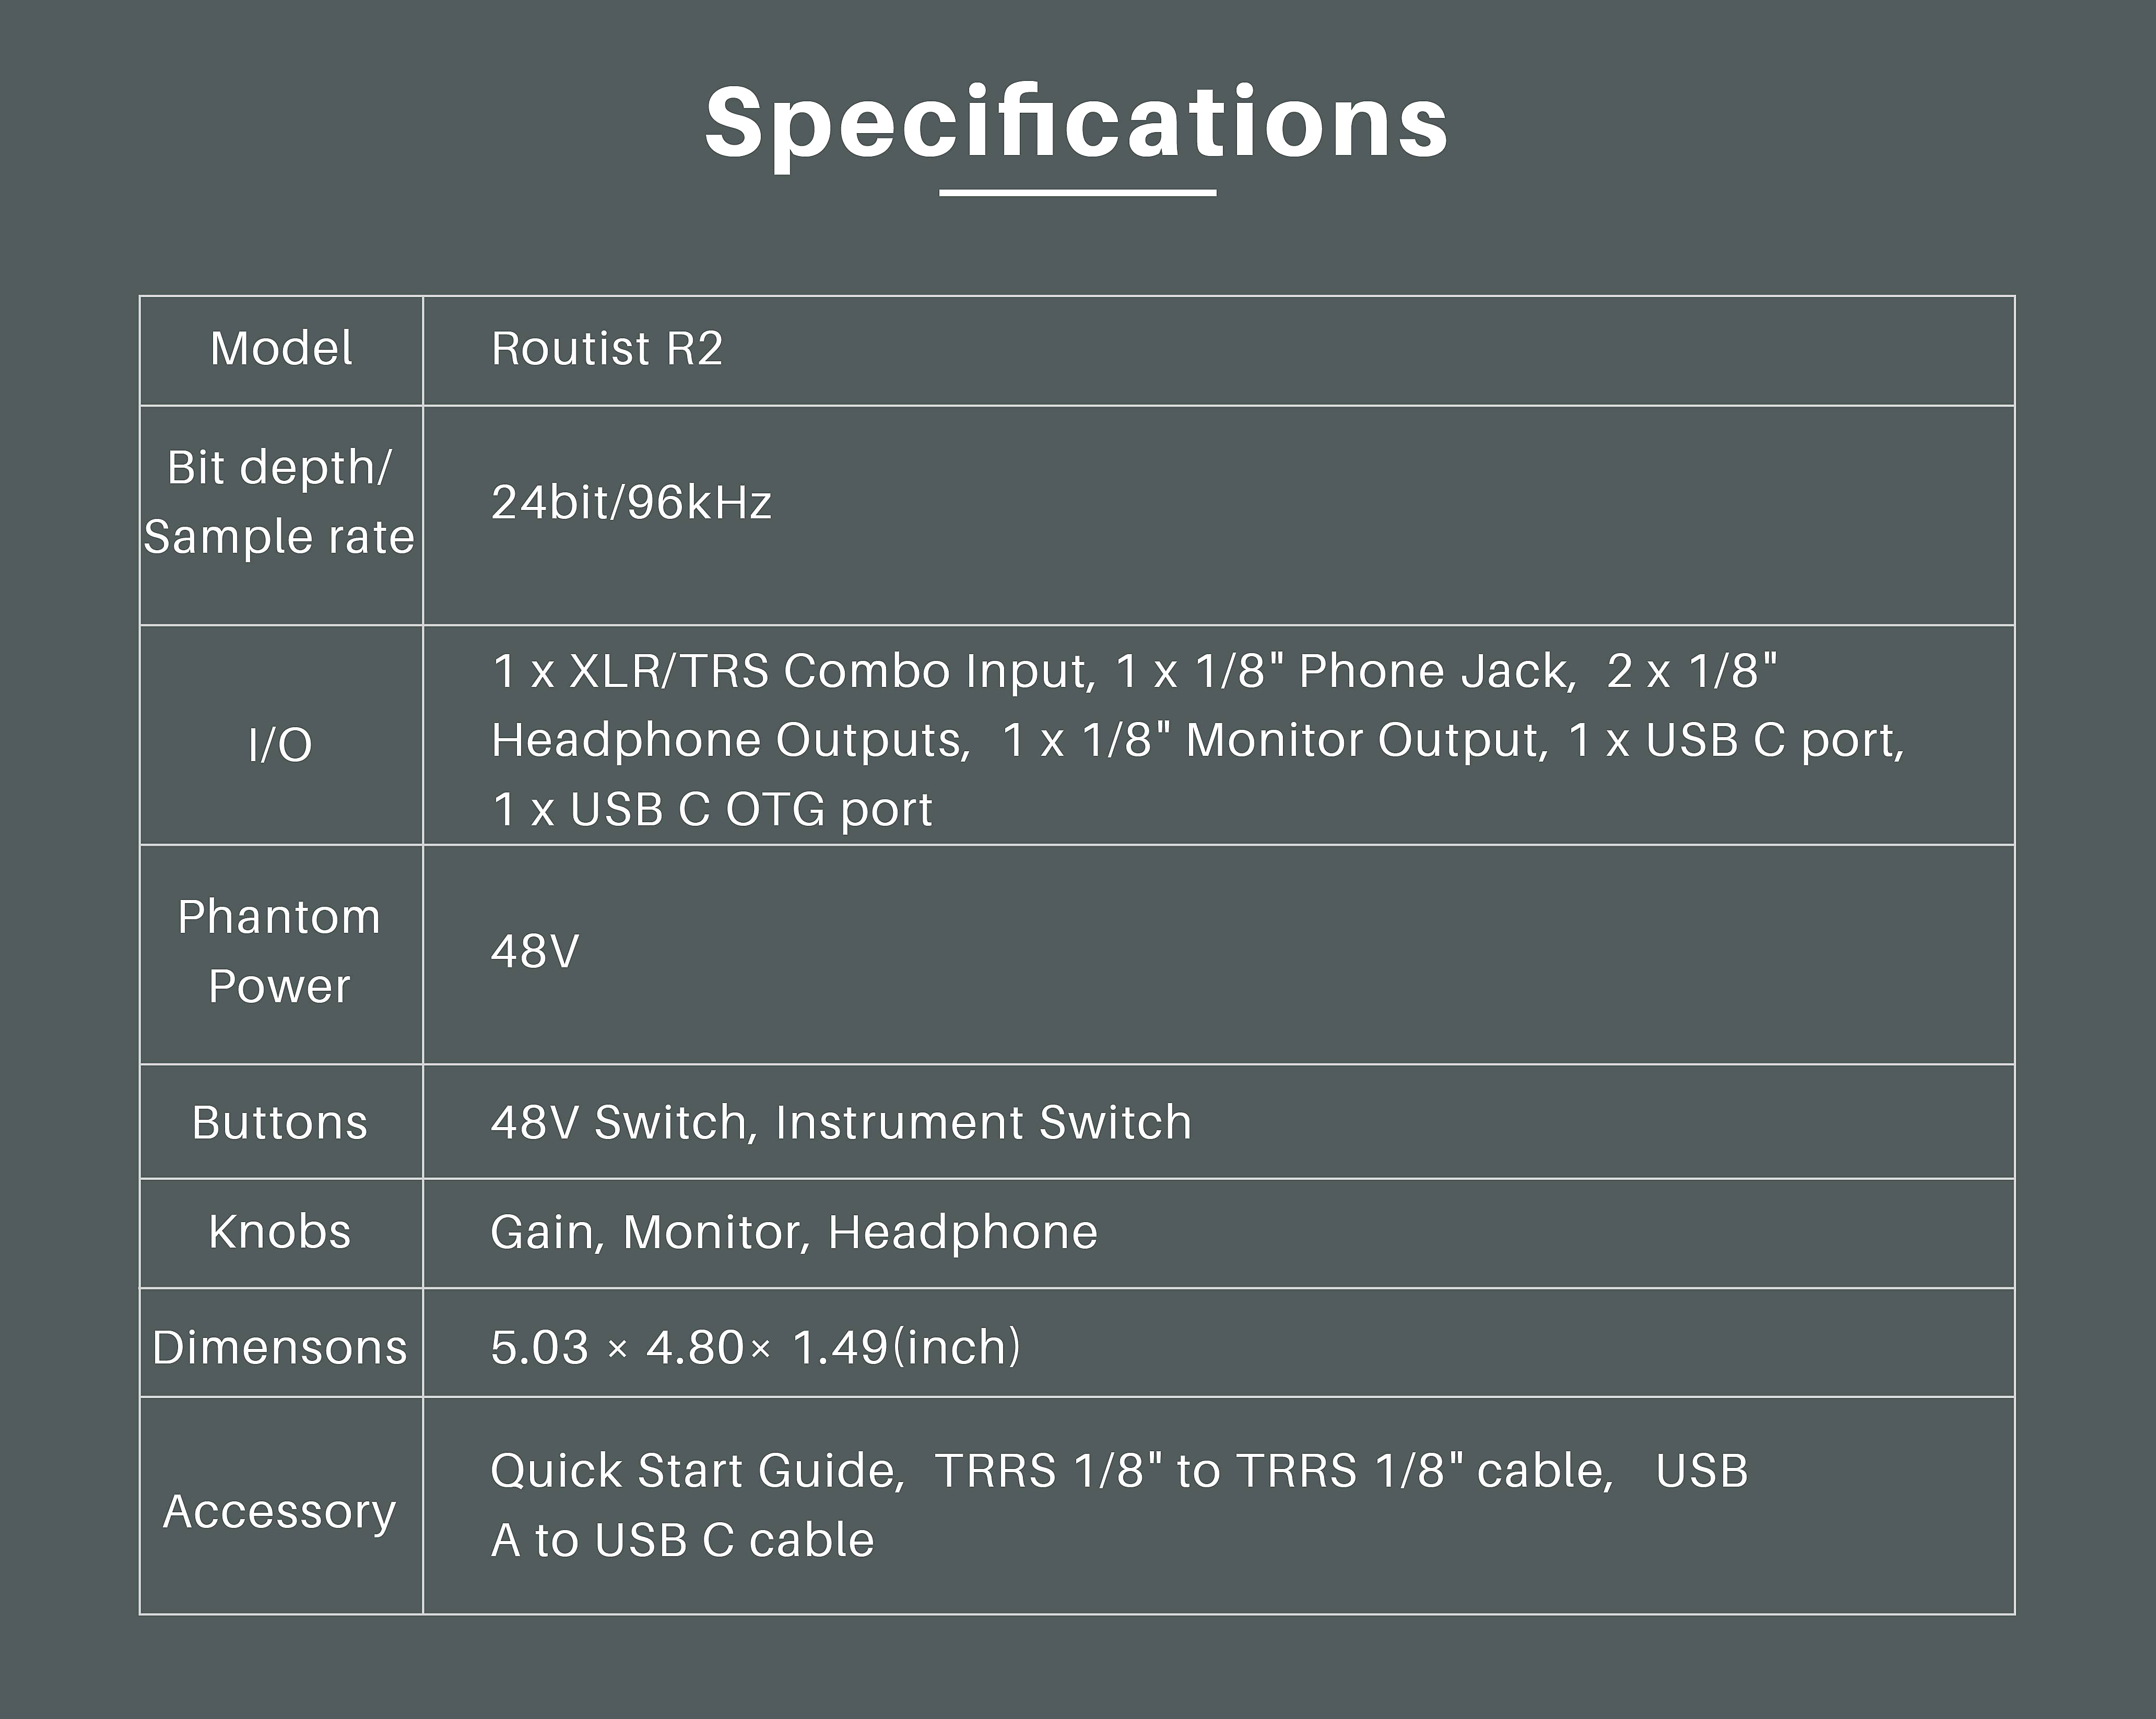 Specifications - Routist R2 - Image 7.jp